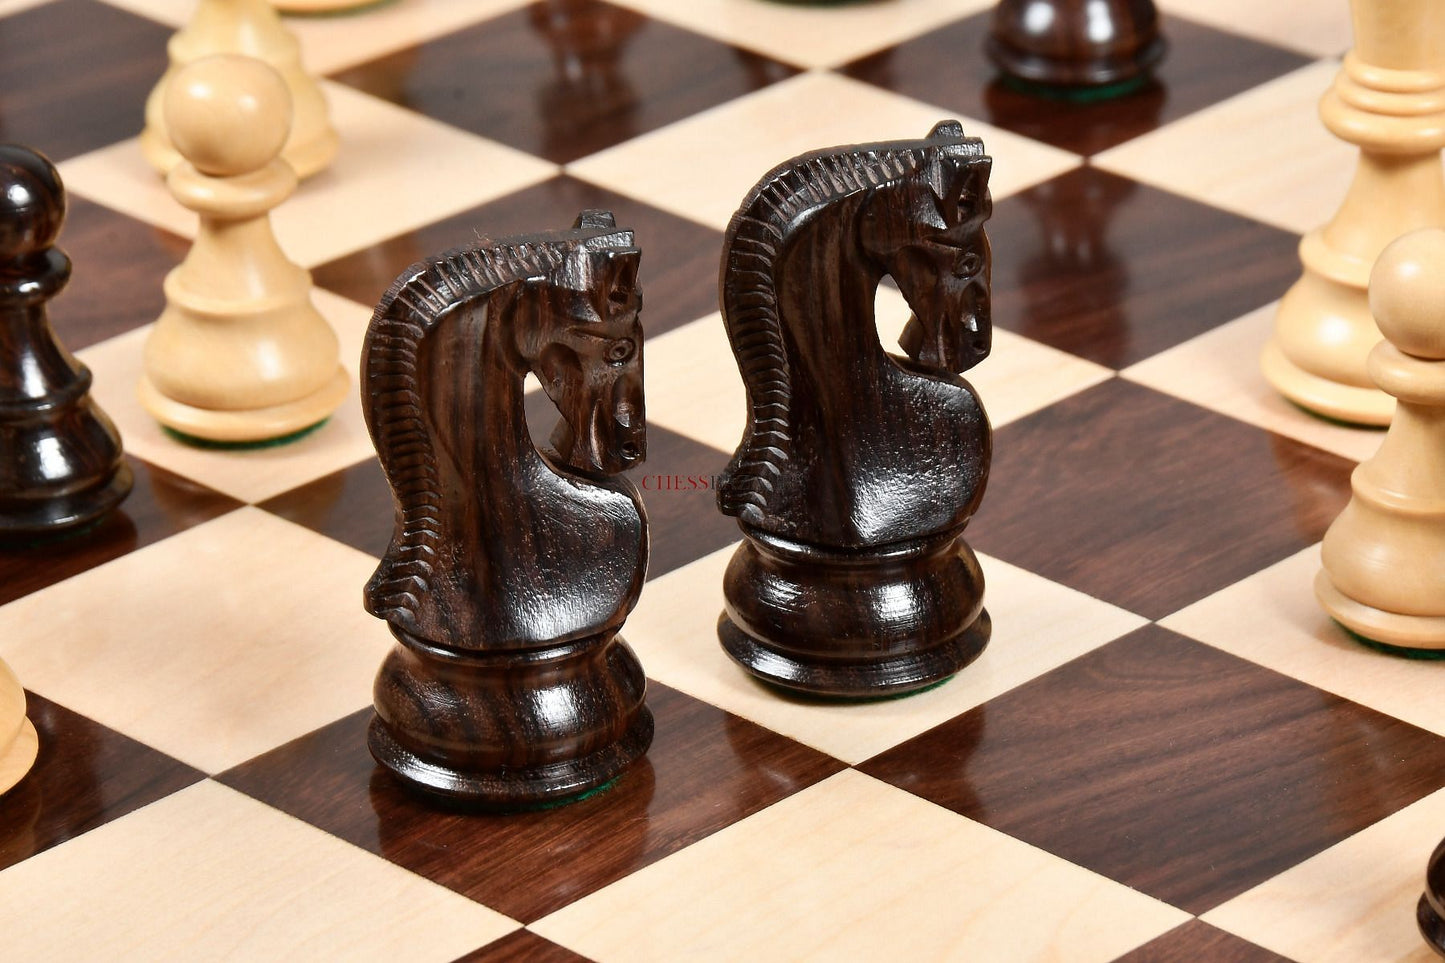 Old 1959 Russian Zagreb Staunton Chess Pieces in Rosewood / Natural Boxwood - 3.8" King